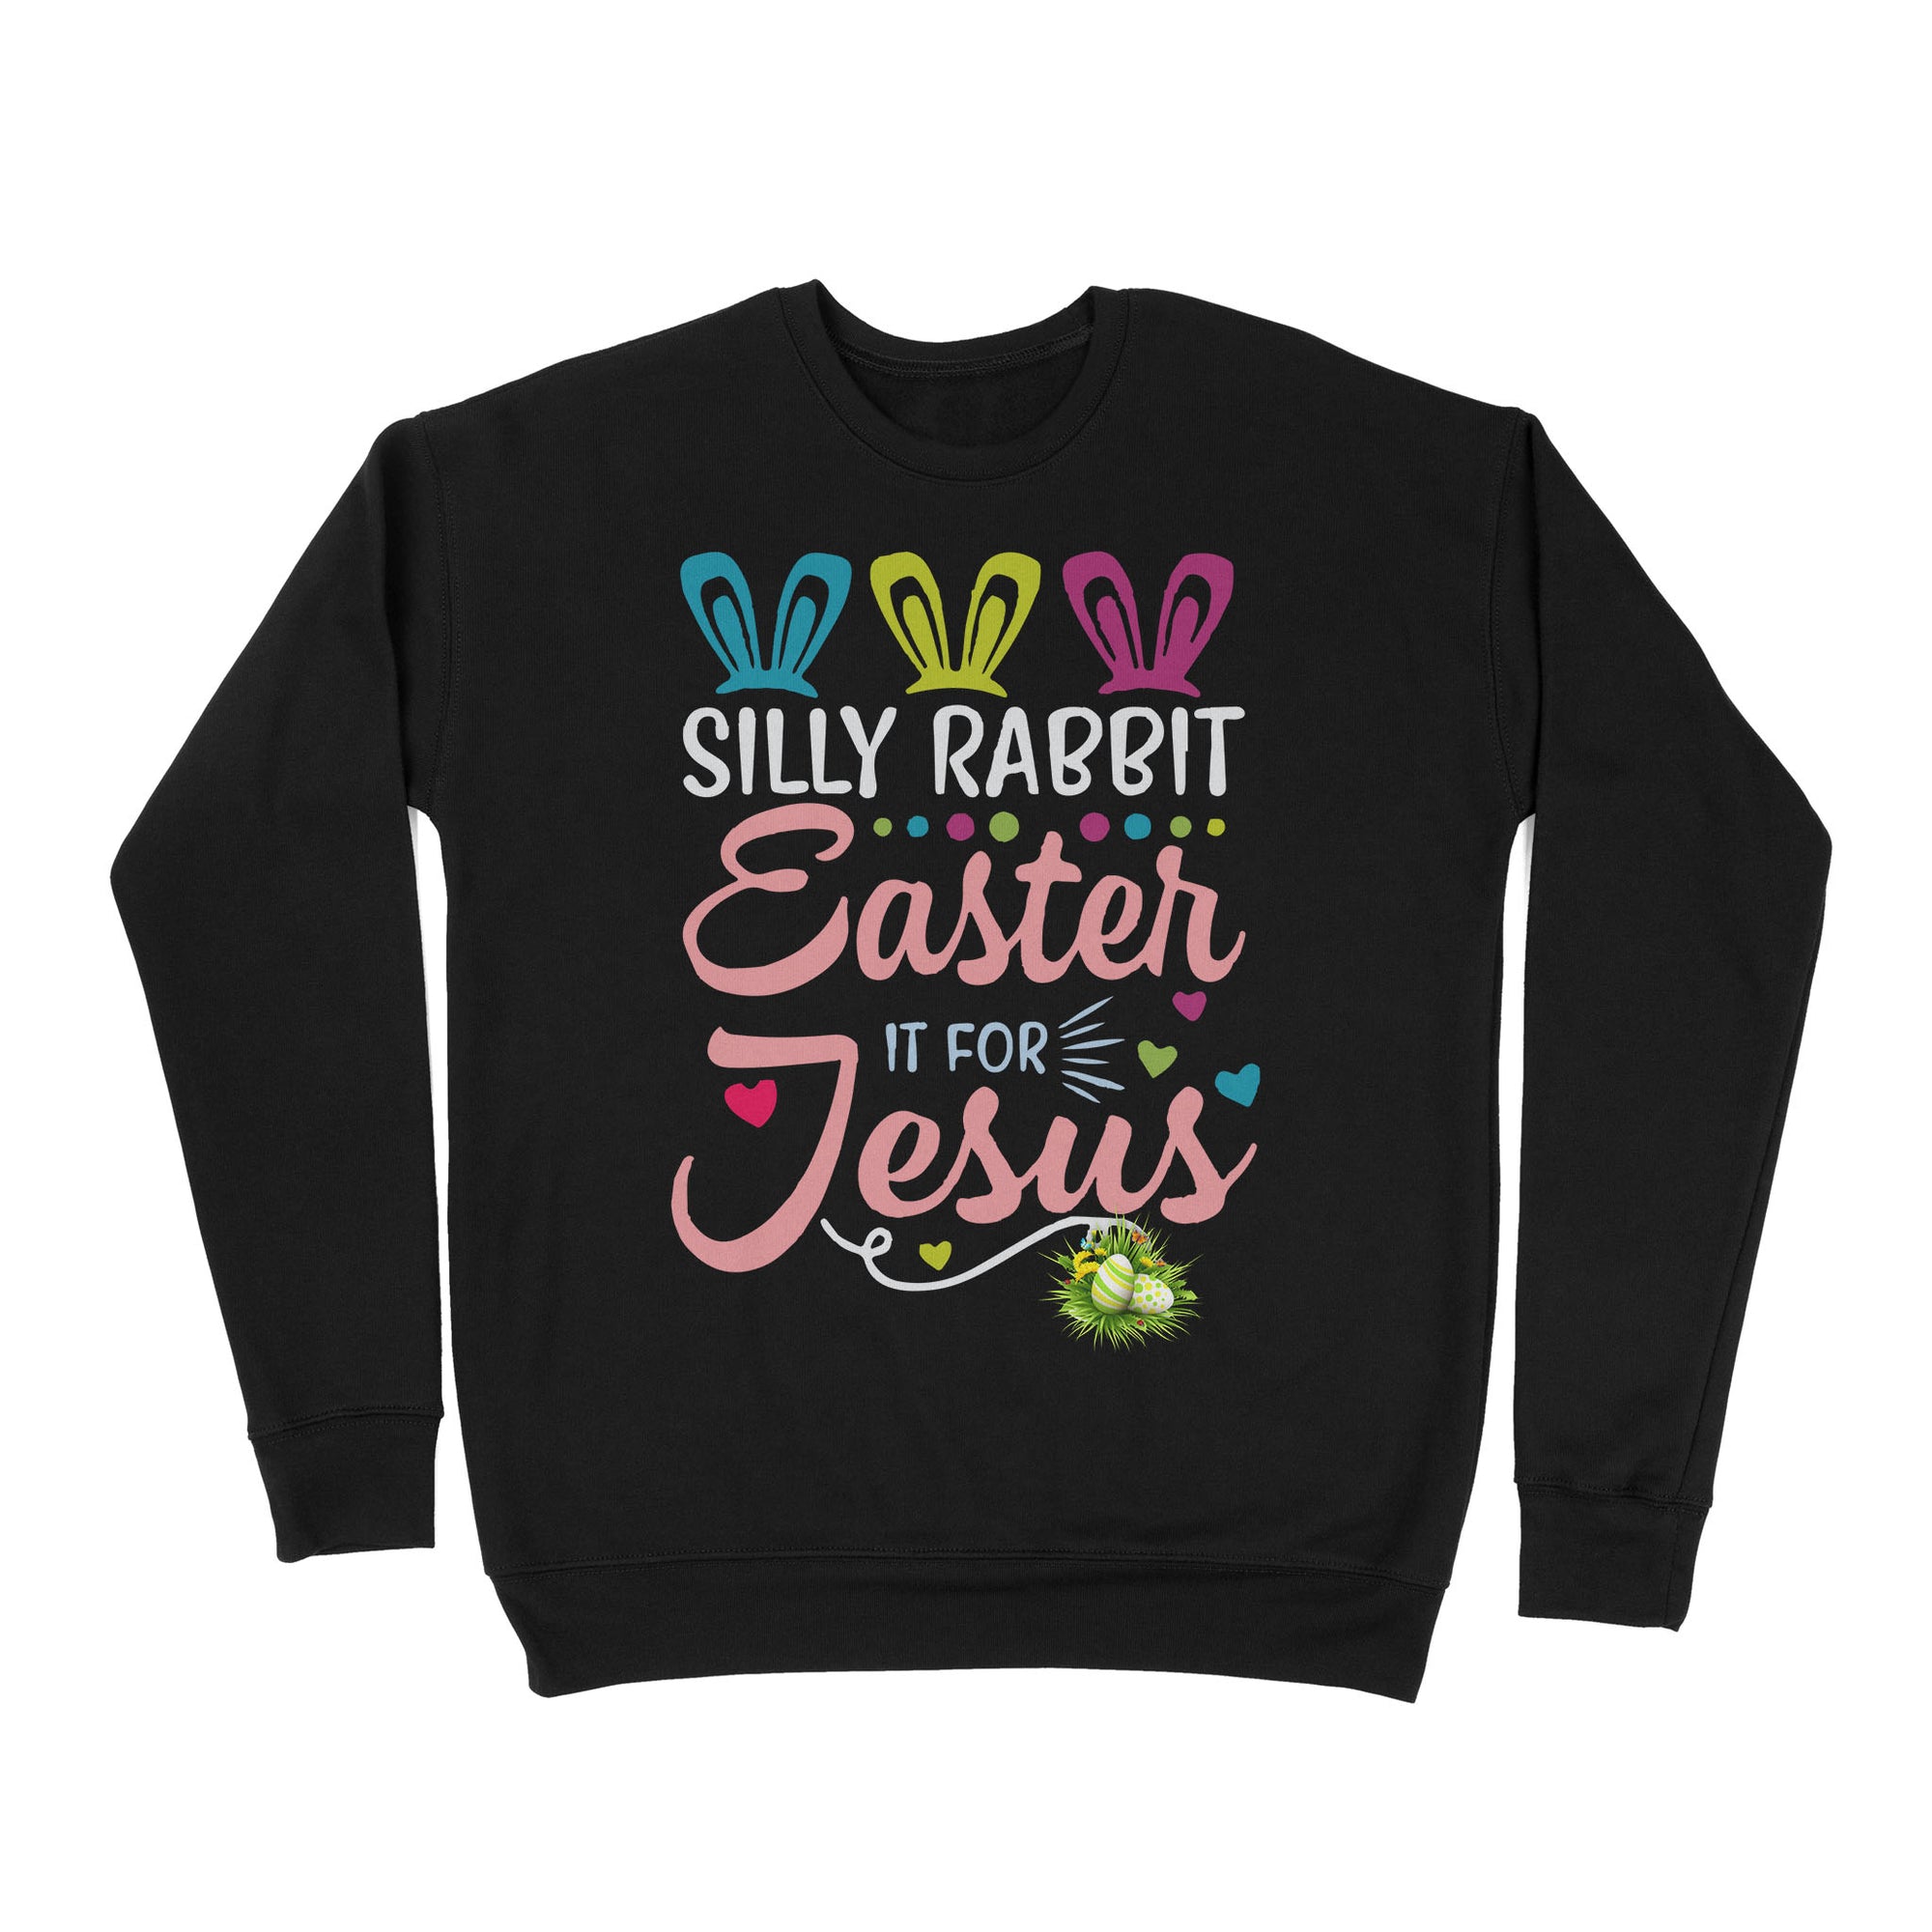 Premium Crew Neck Sweatshirt - Silly Rabbit Easter Is For Jesus Christians Cross Bunny Easter Eggs Cute